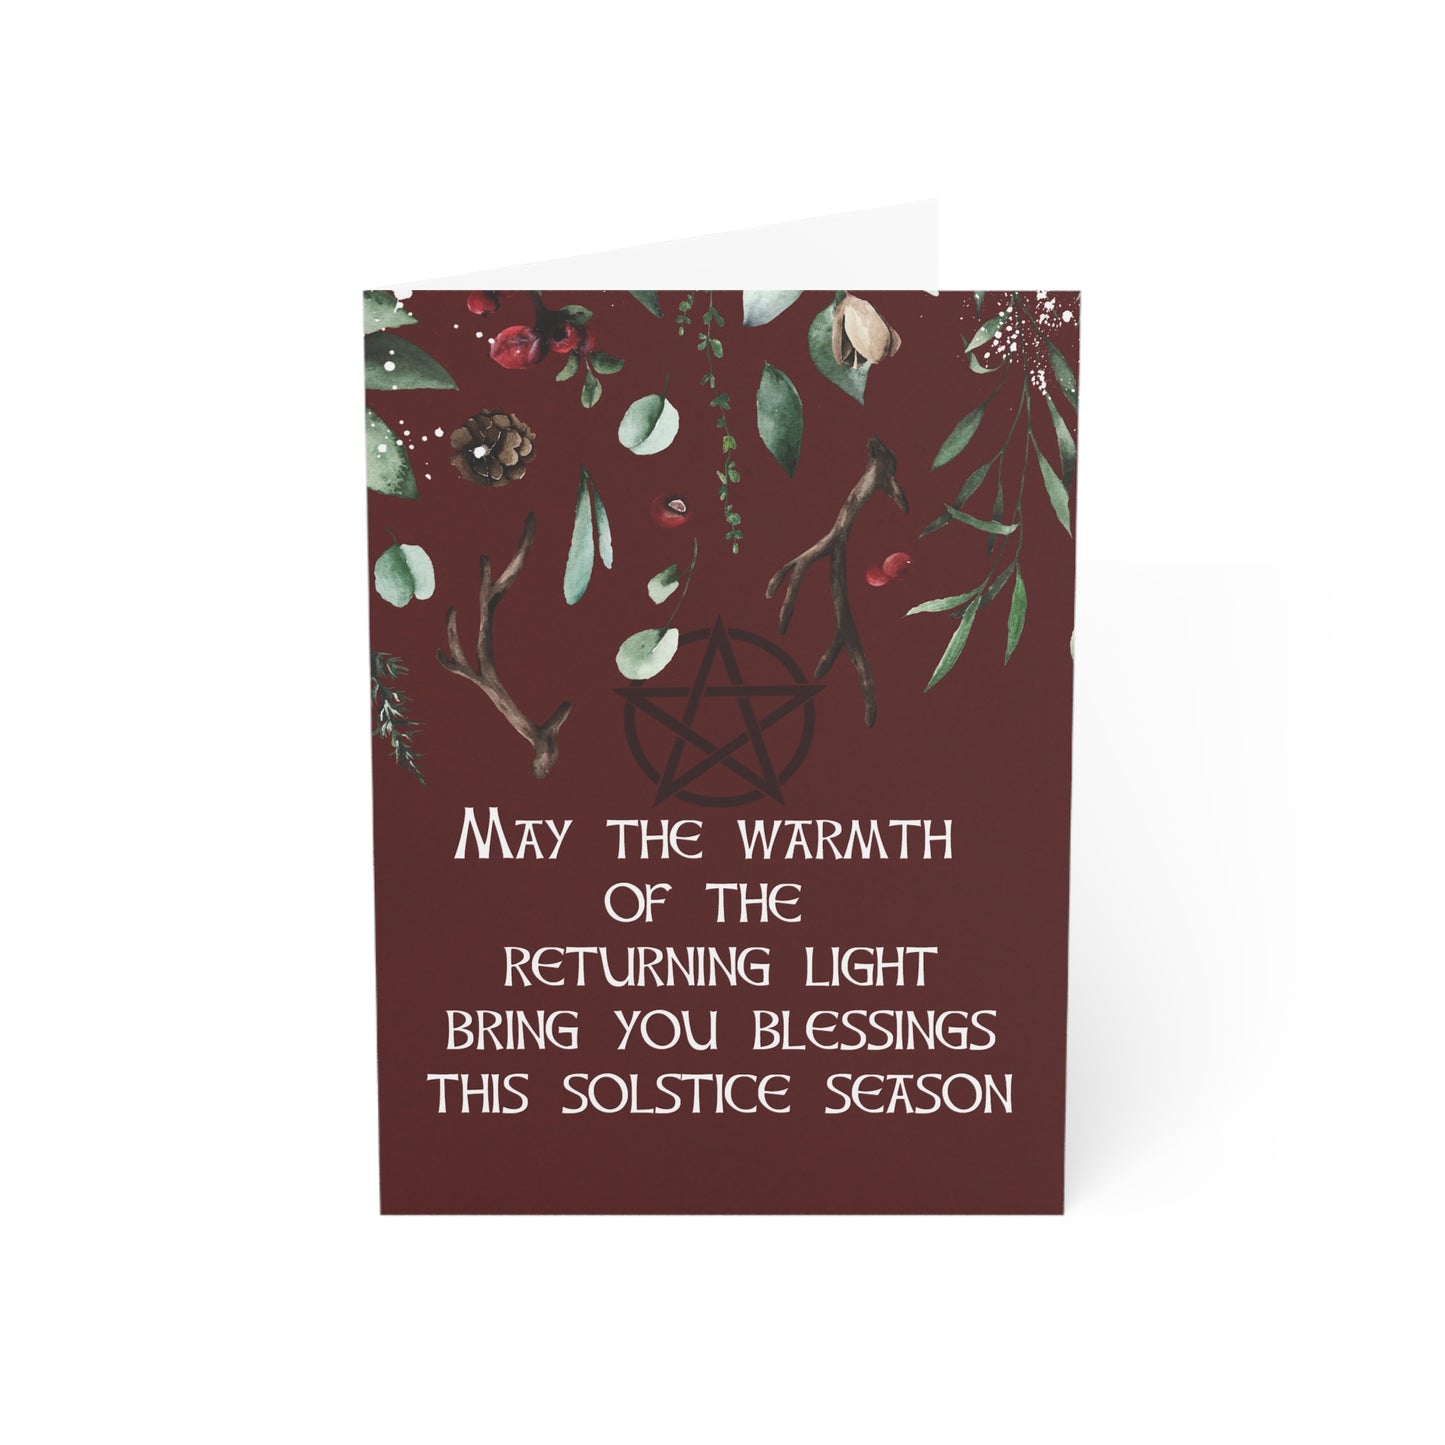 Yule Greeting Card Red | Blank Inside | Witchy Pagan Yule Greeting Cards (1, 10, 30 and 50 pcs)